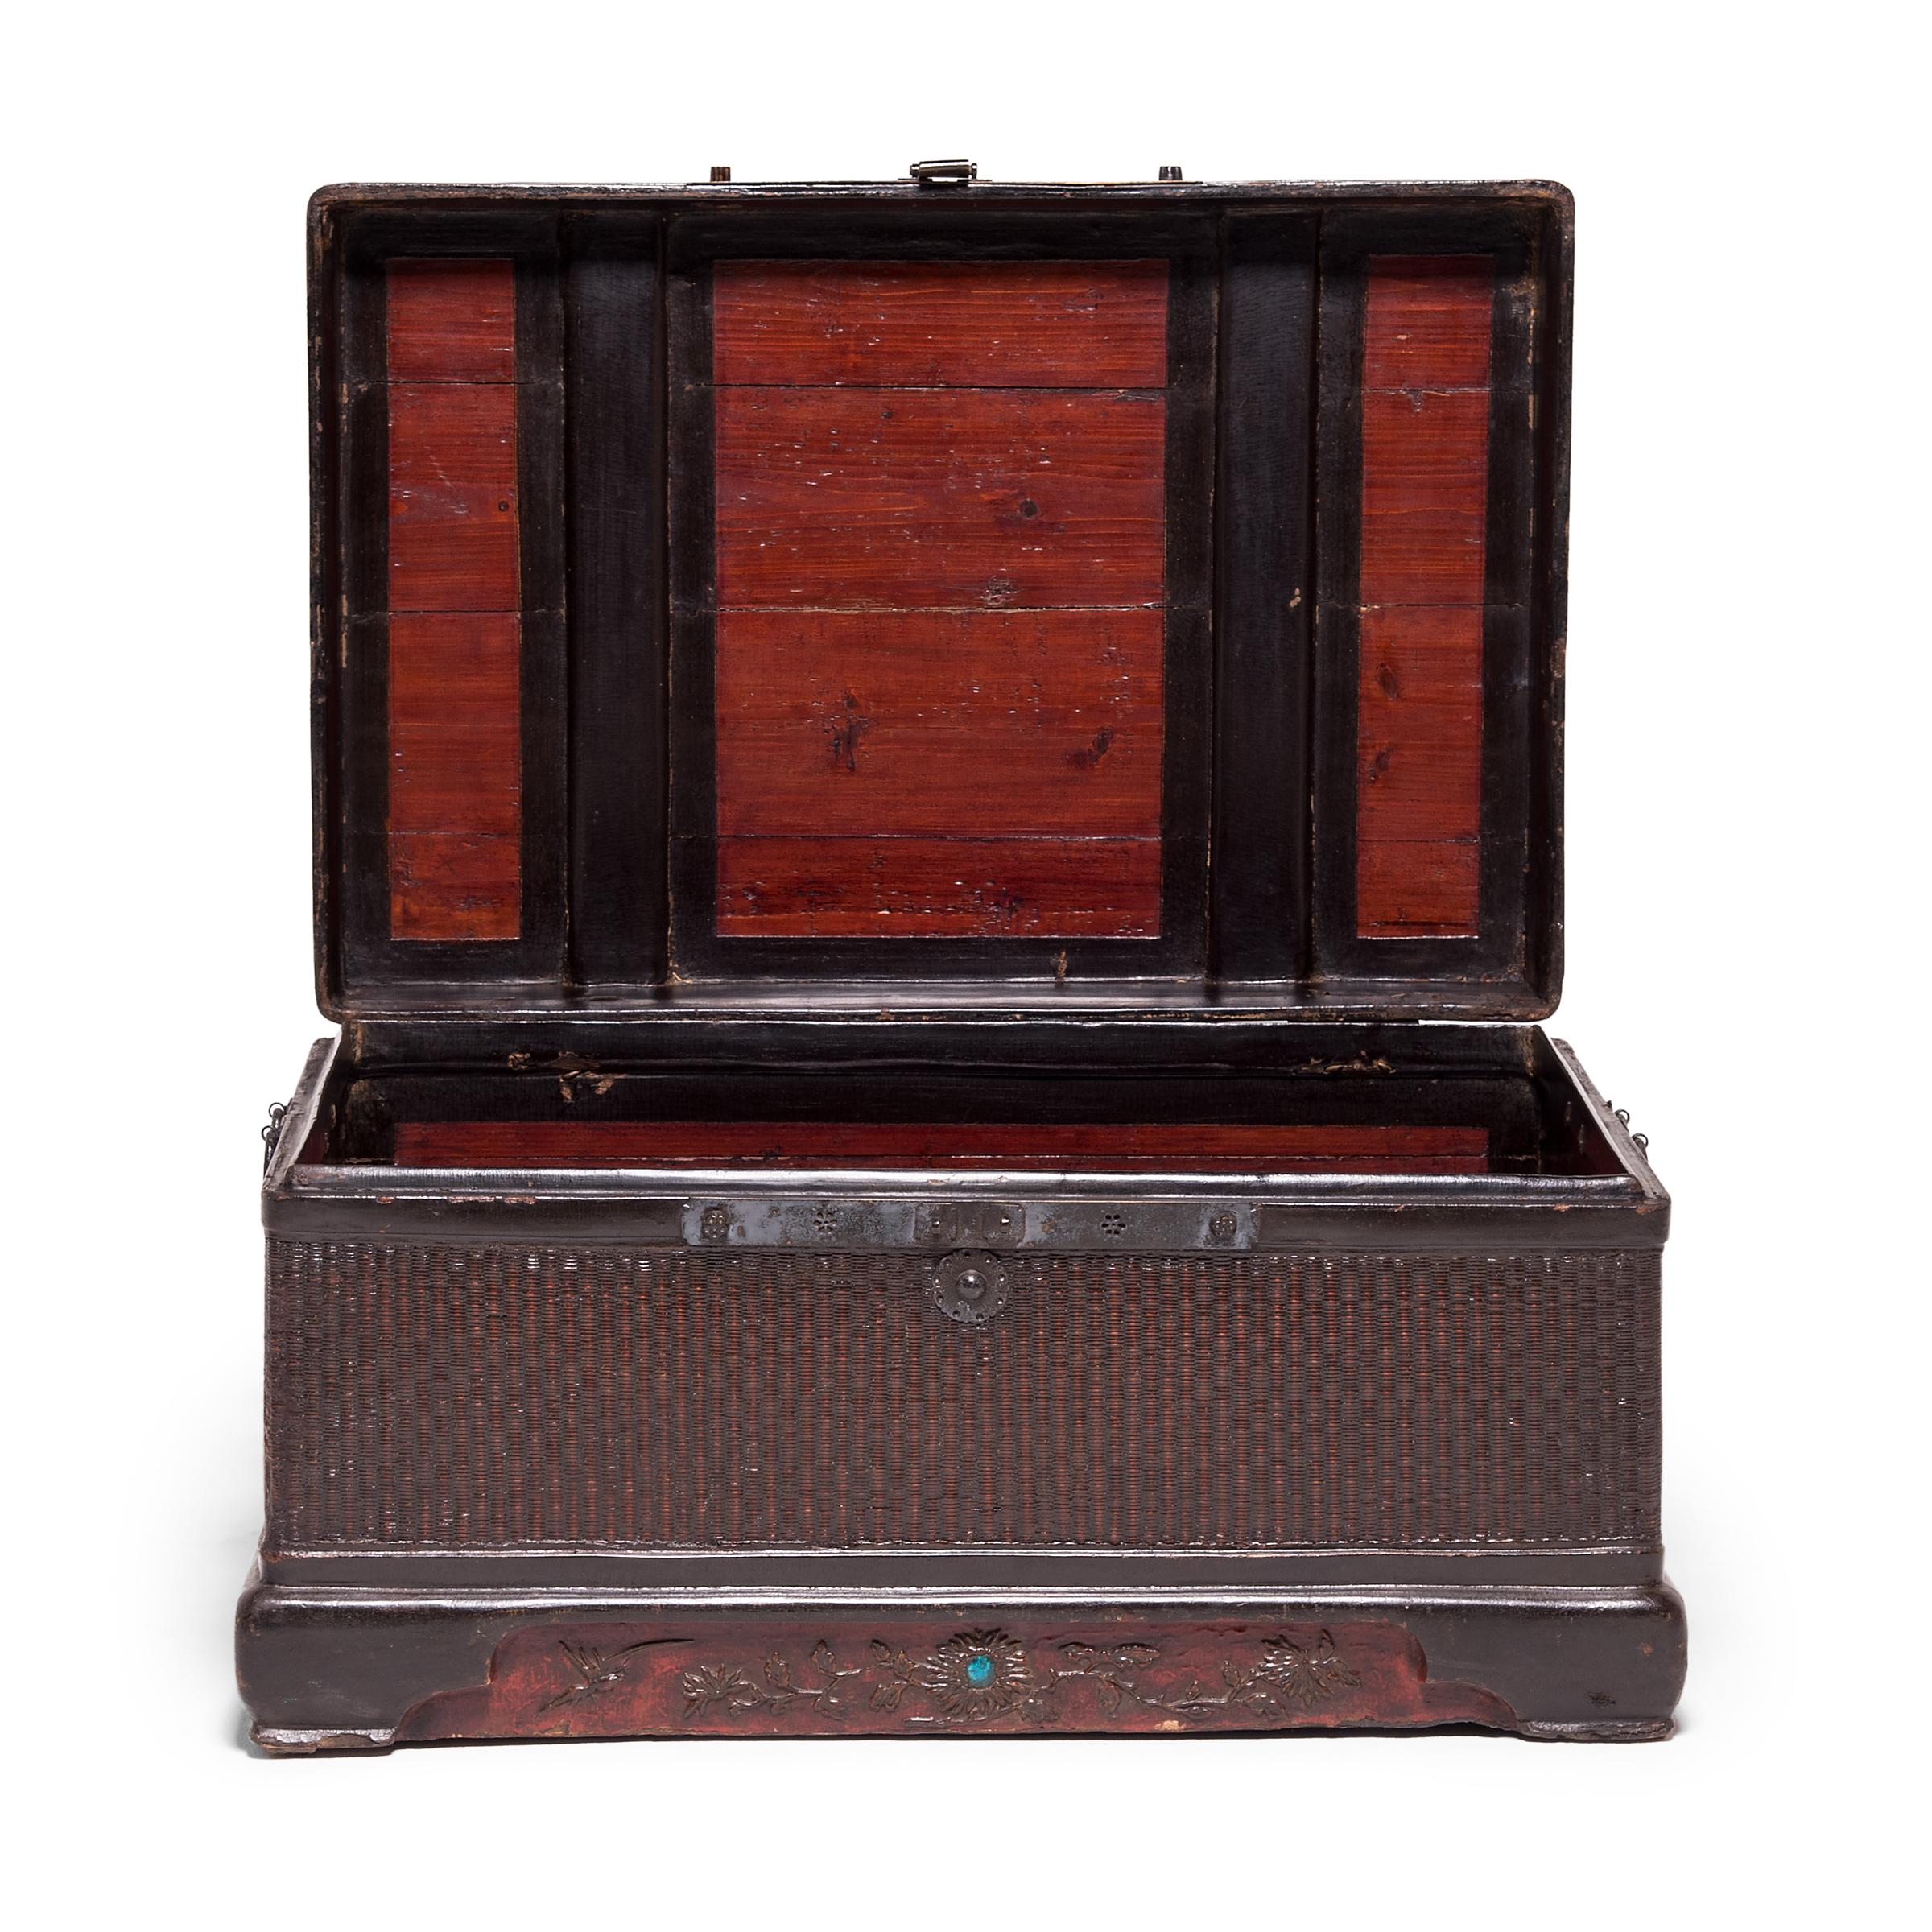 A work of art in itself, this finely woven Qing dynasty trunk likely once stored prized painted scrolls. Framed in elmwood, the trunk’s panels are lined with thin reeds that were painstakingly woven by a skilled artisan. The trunk’s top opens to